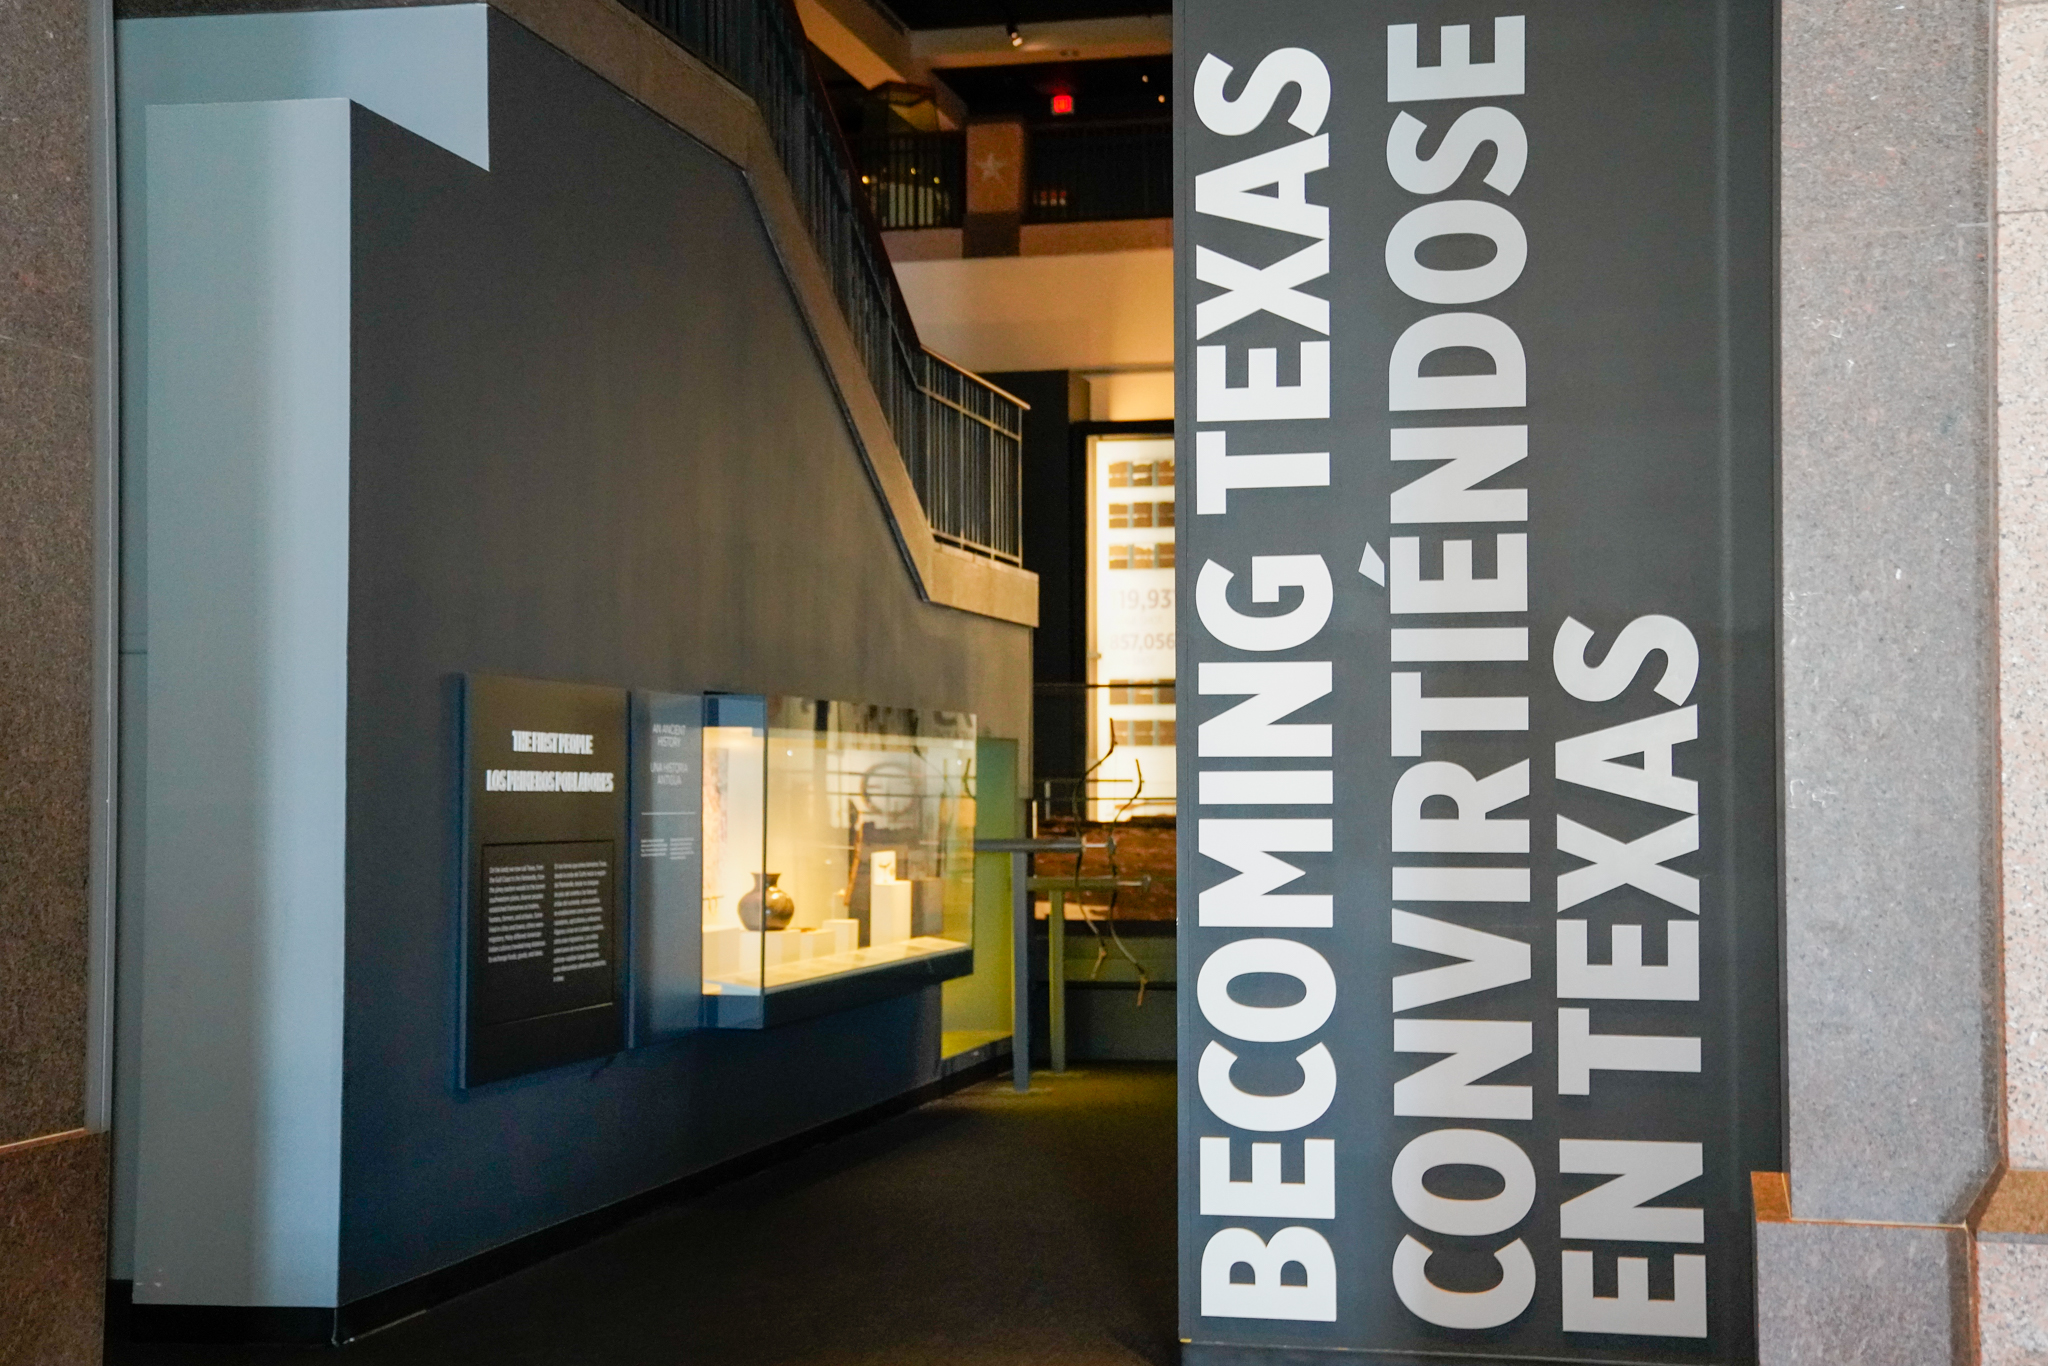 The Bullock Museum's three floors of Texas History Galleries are now fully bilingual in English and Spanish.